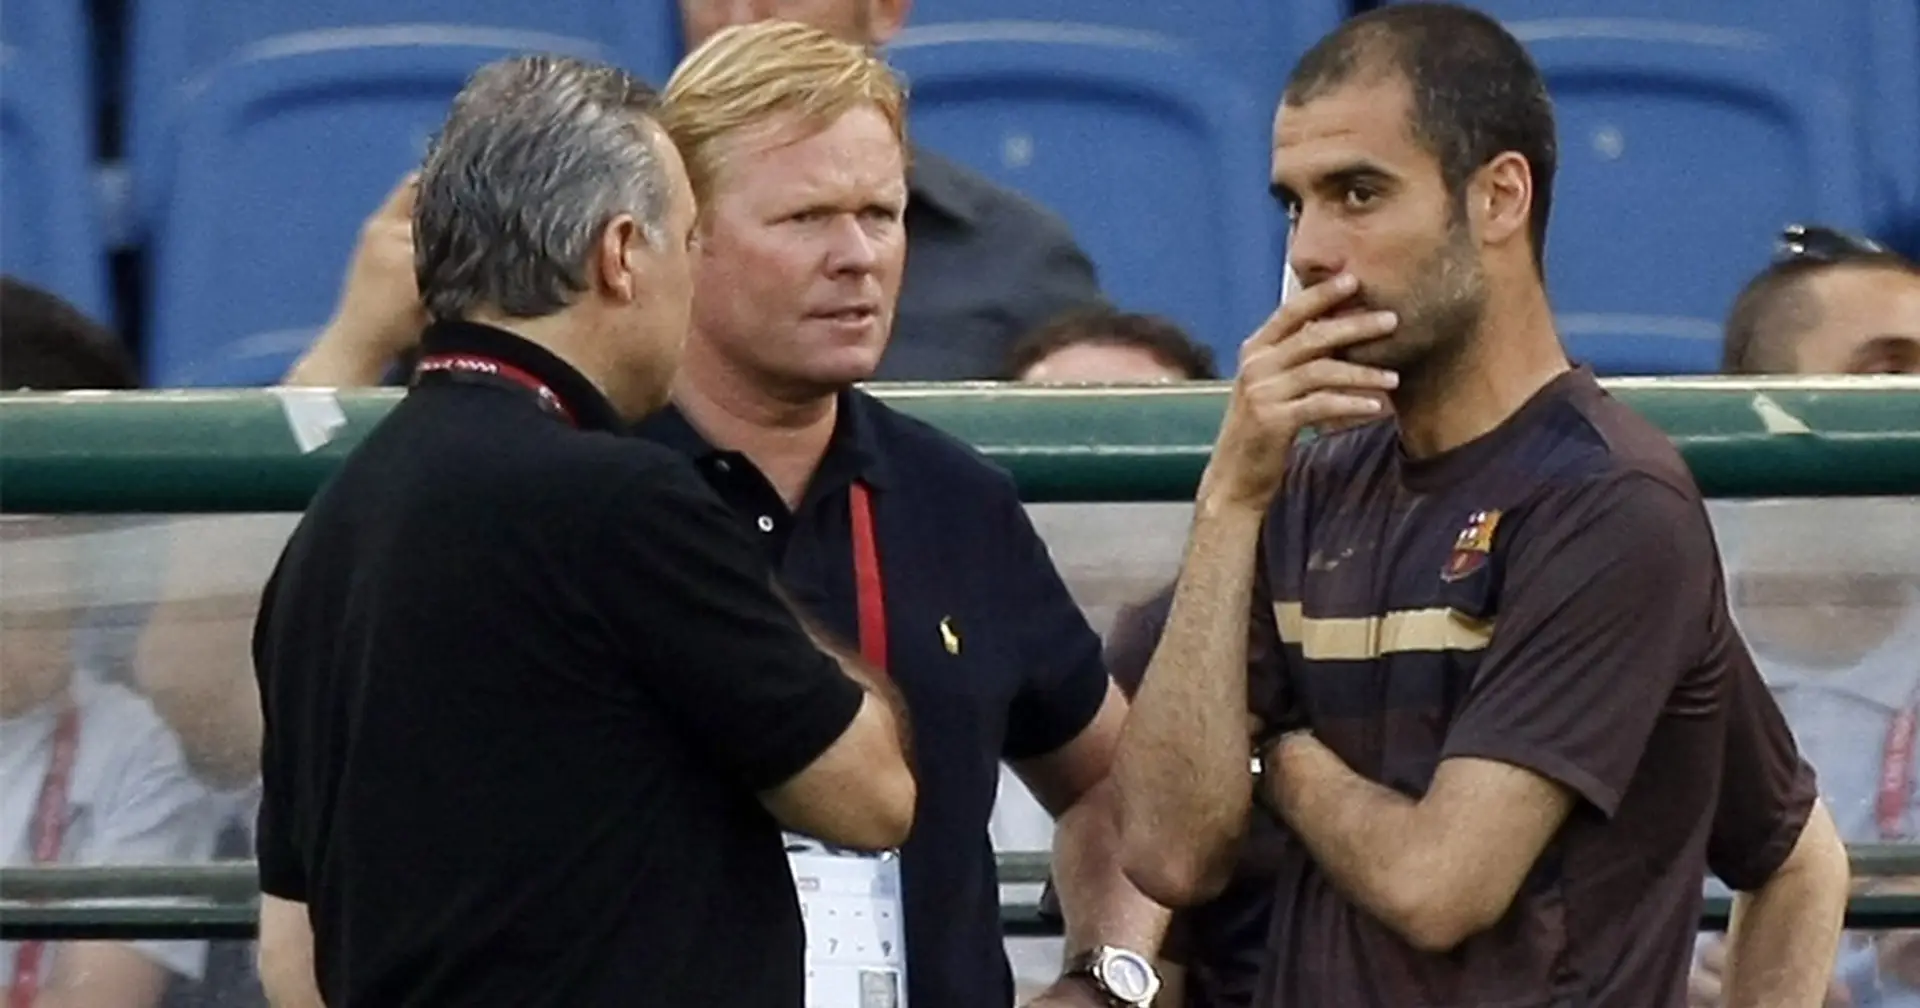 Pep Guardiola once admitted he learned from Ronald Koeman the coach: Here's how